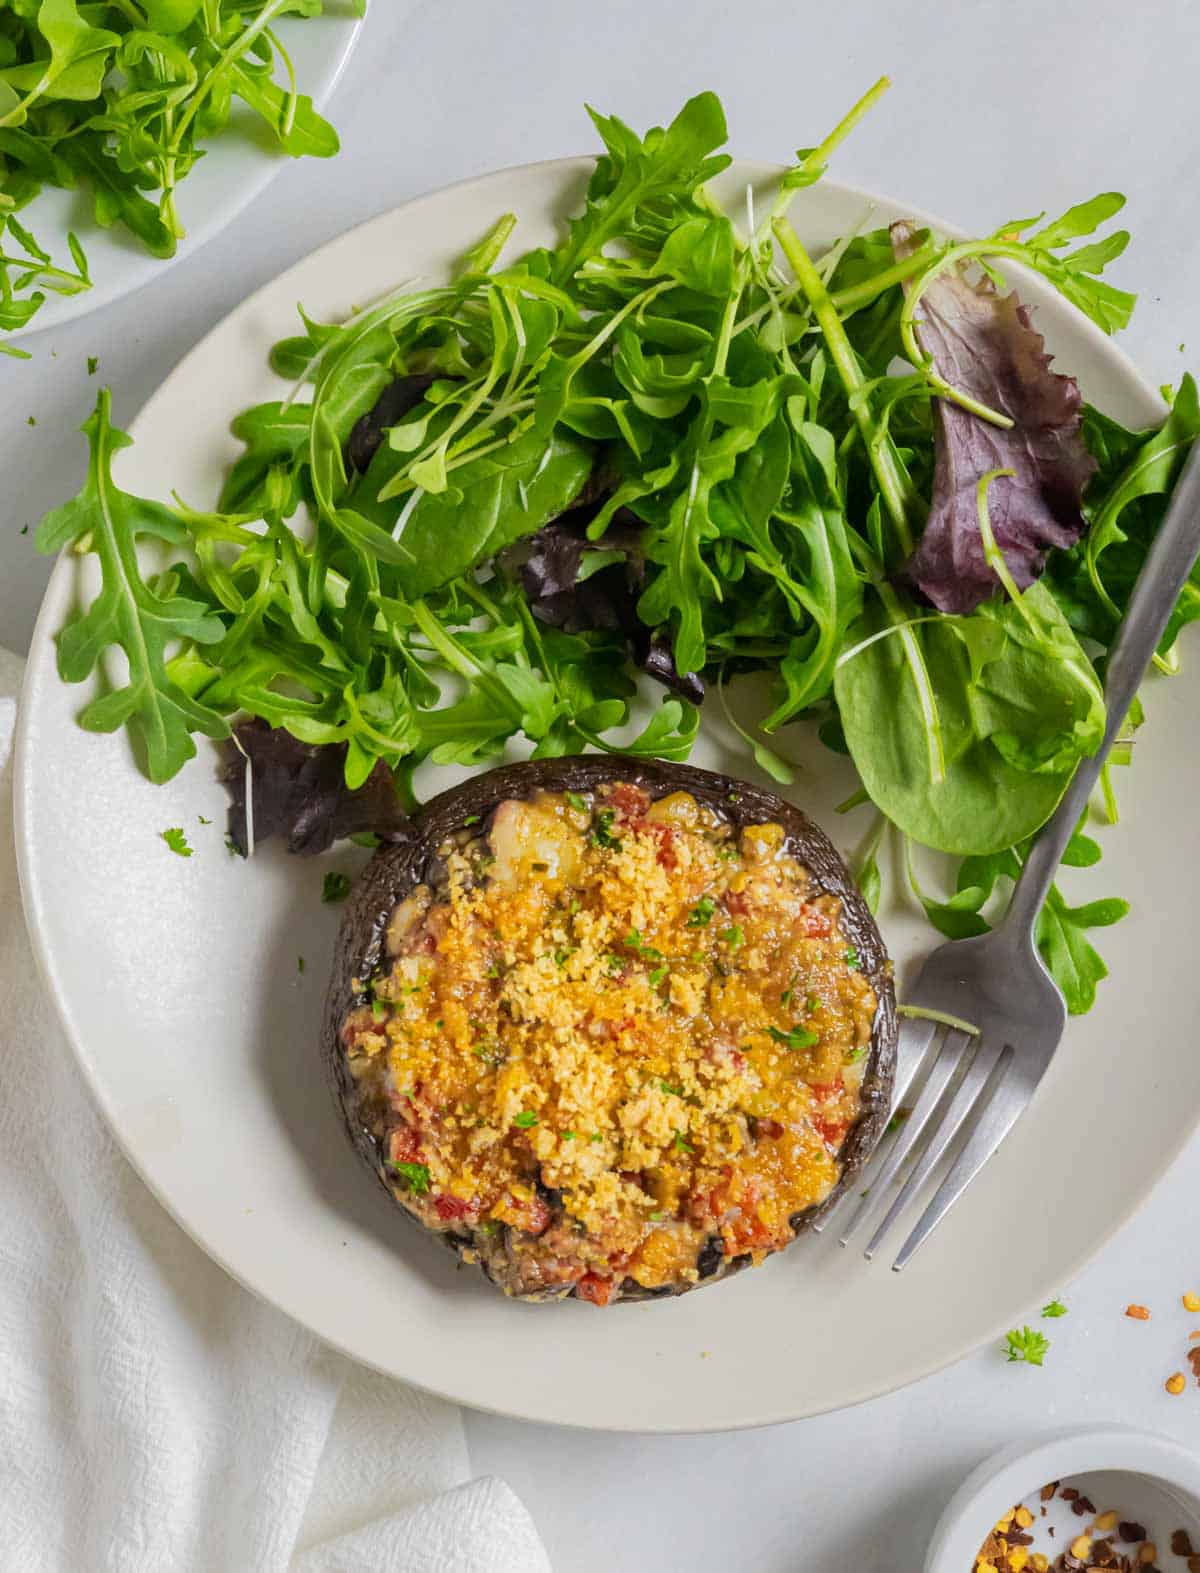 Stuffed portobello mushroom on a white plate with salad greens and a fork.